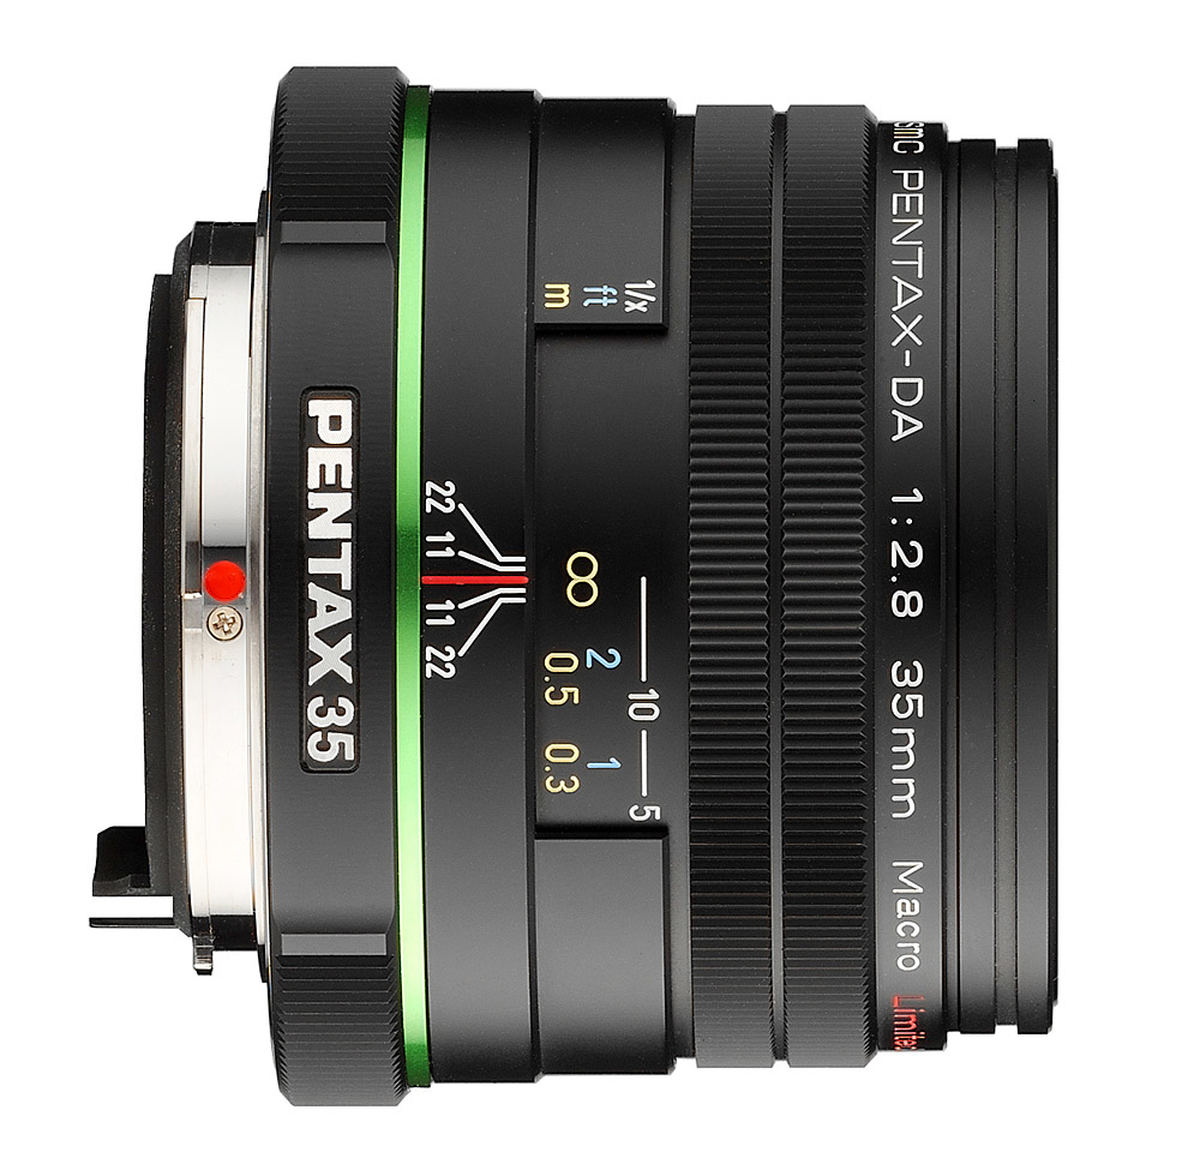 Pentax SMC DA 35mm f/2.8 Macro Limited : Specifications and Opinions |  JuzaPhoto